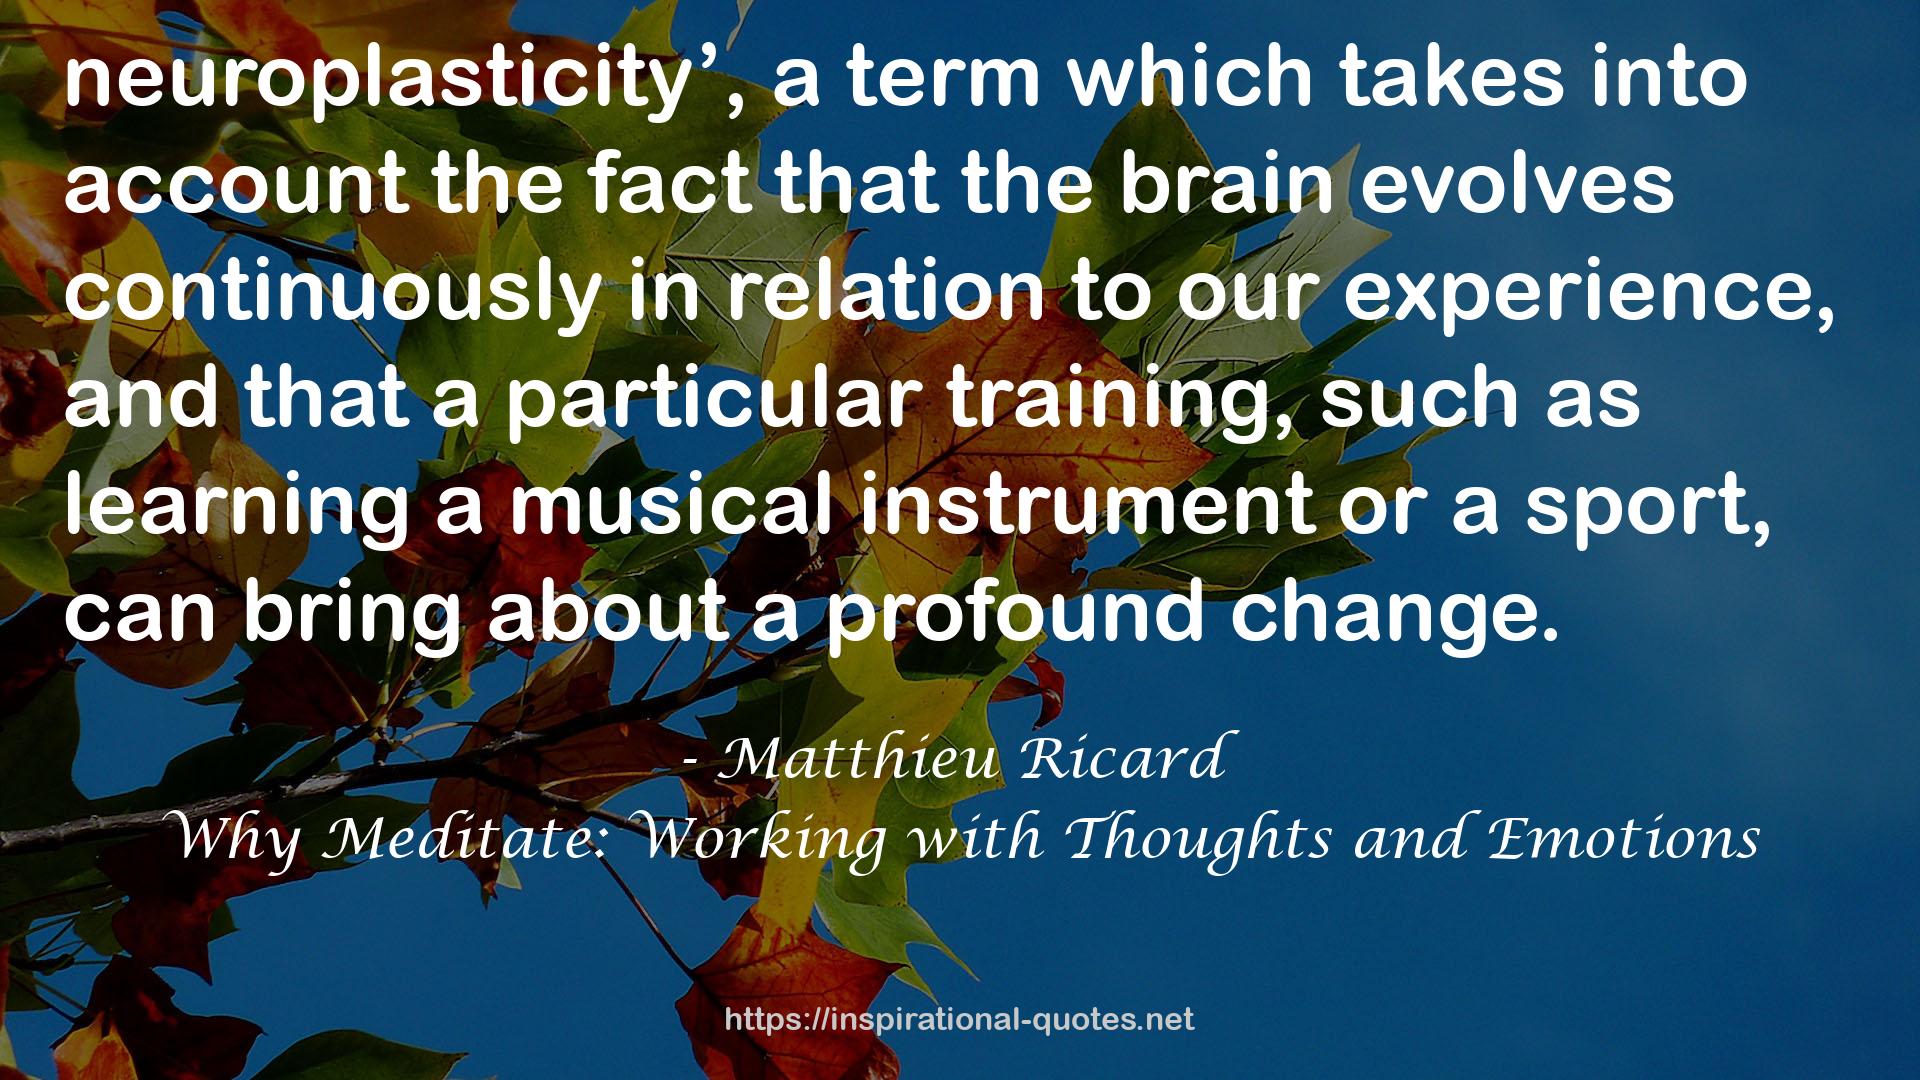 Why Meditate: Working with Thoughts and Emotions QUOTES